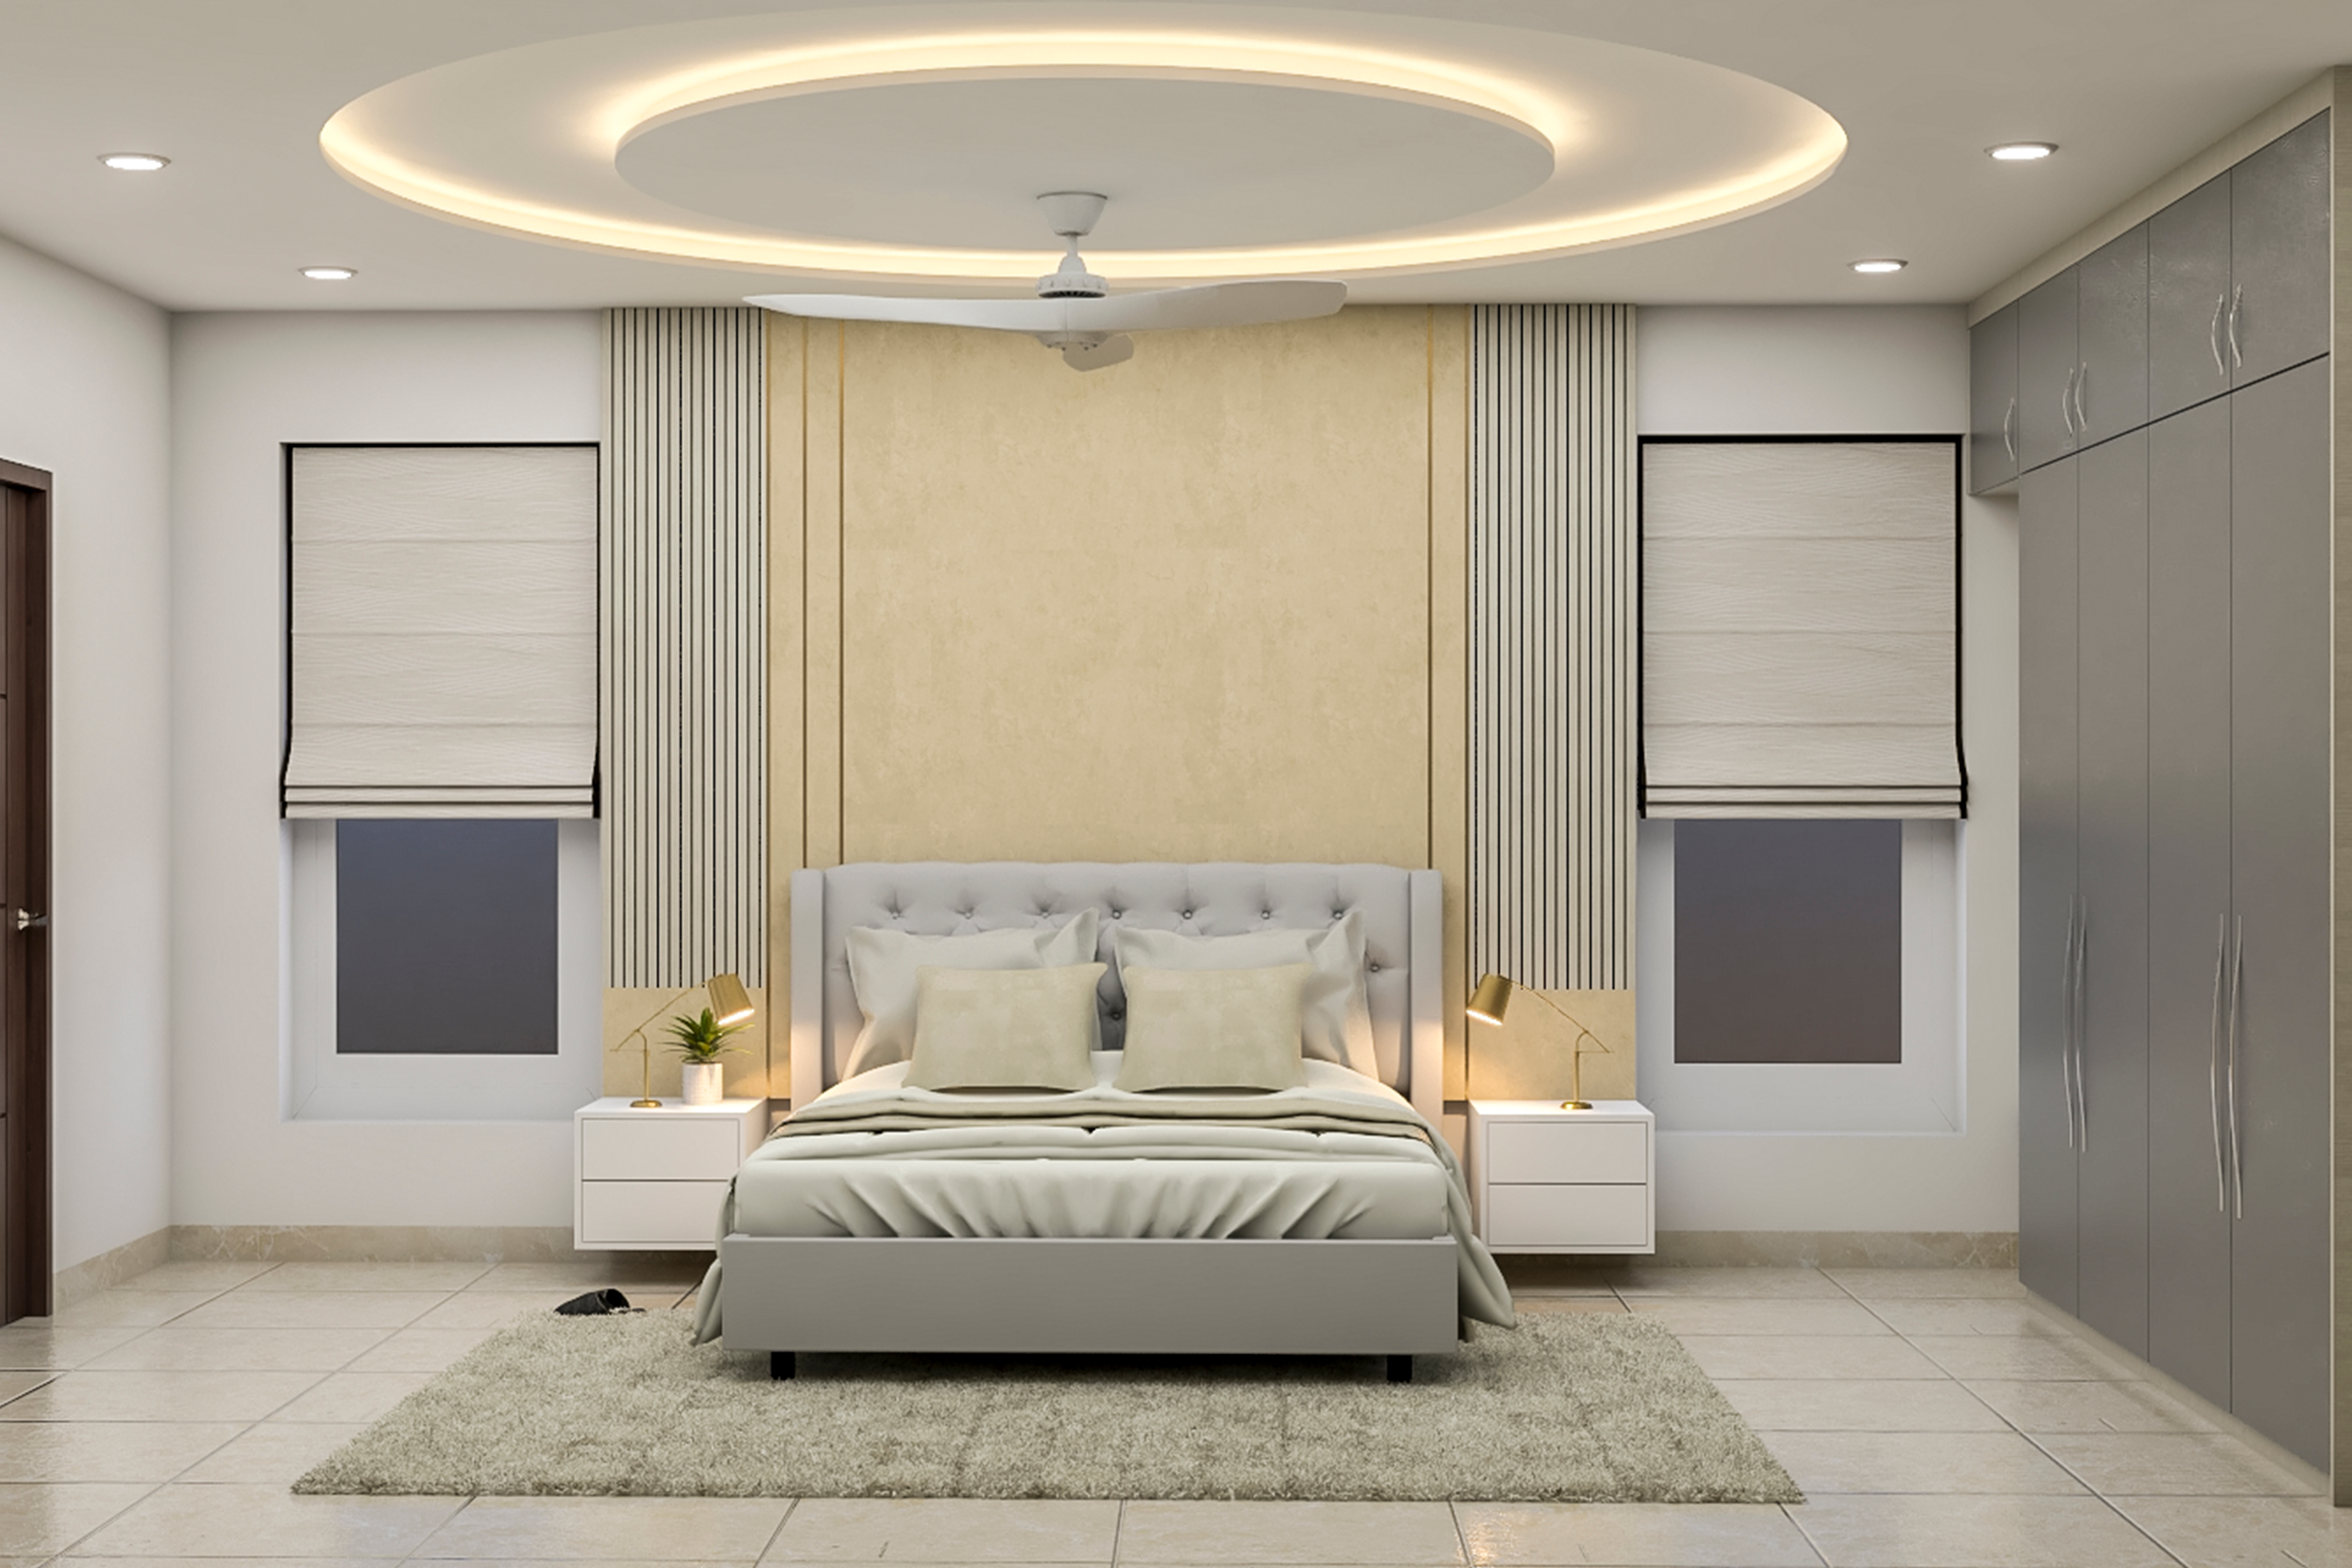 Contemporary Single-Layered False Ceiling Design WIth Cove And Recessed Lights